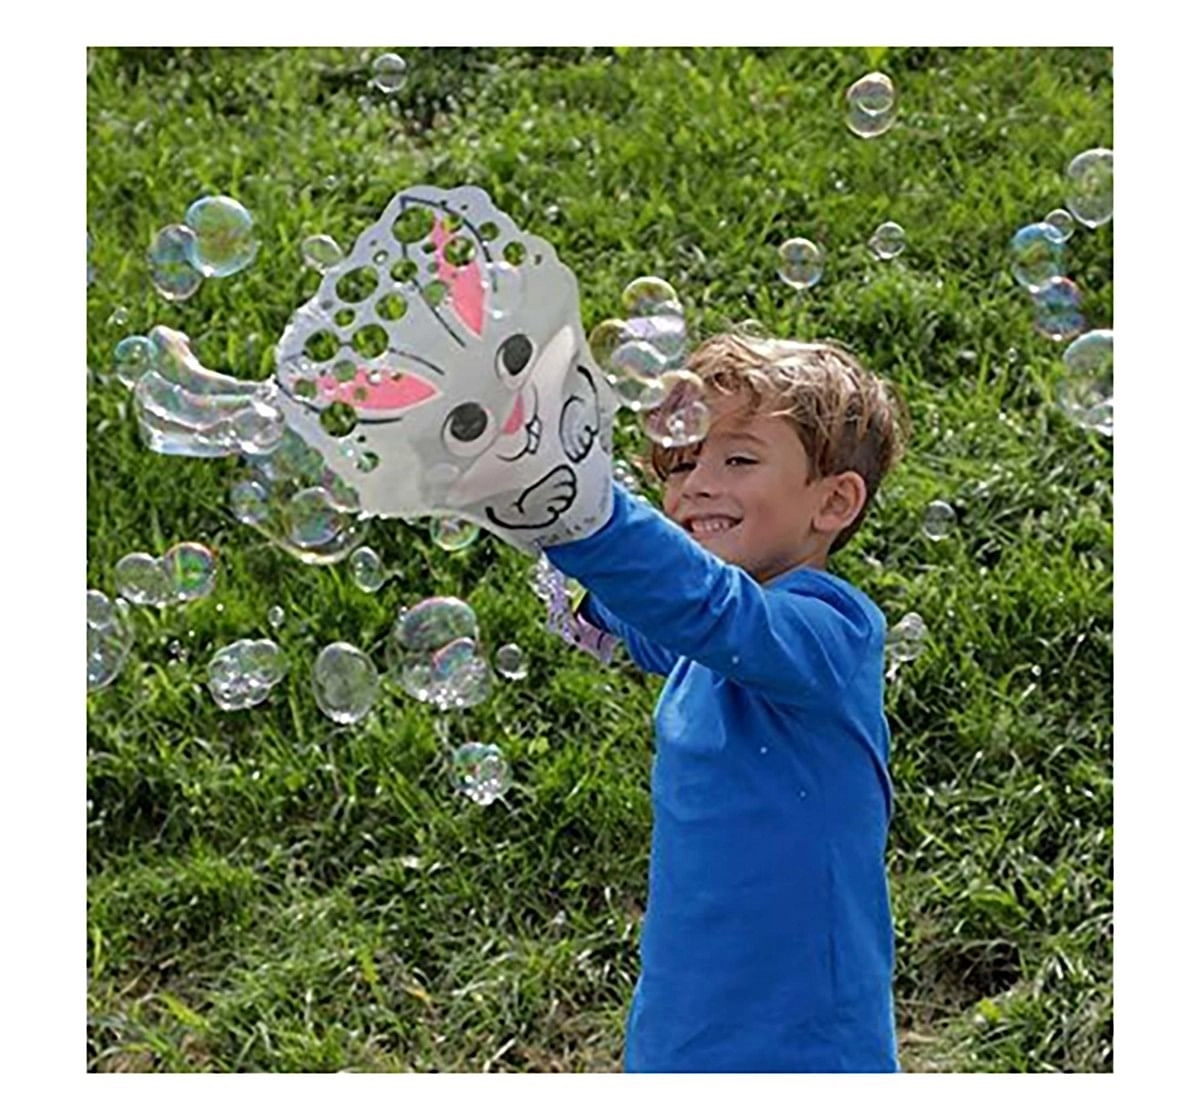 Zing Glove a Bubbles Impulse Toys for Kids age 3Y+ 